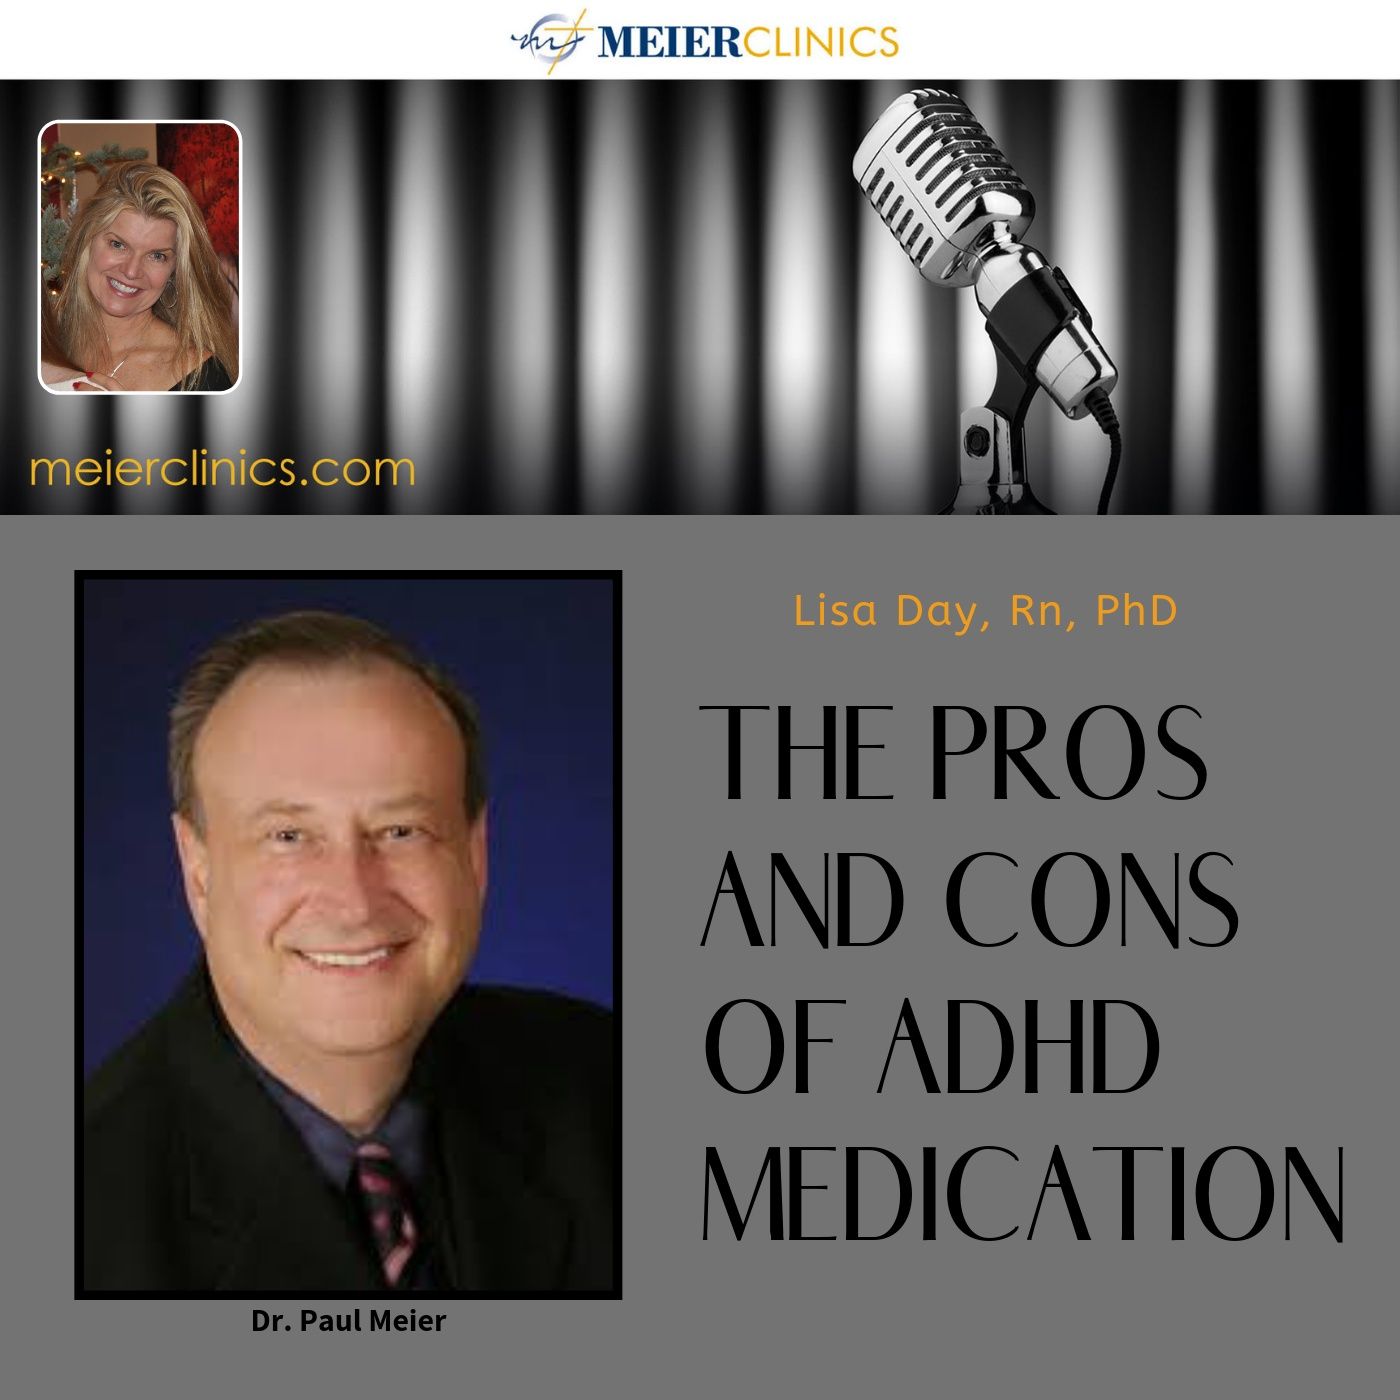 The Pros and Cons of ADHD Medication